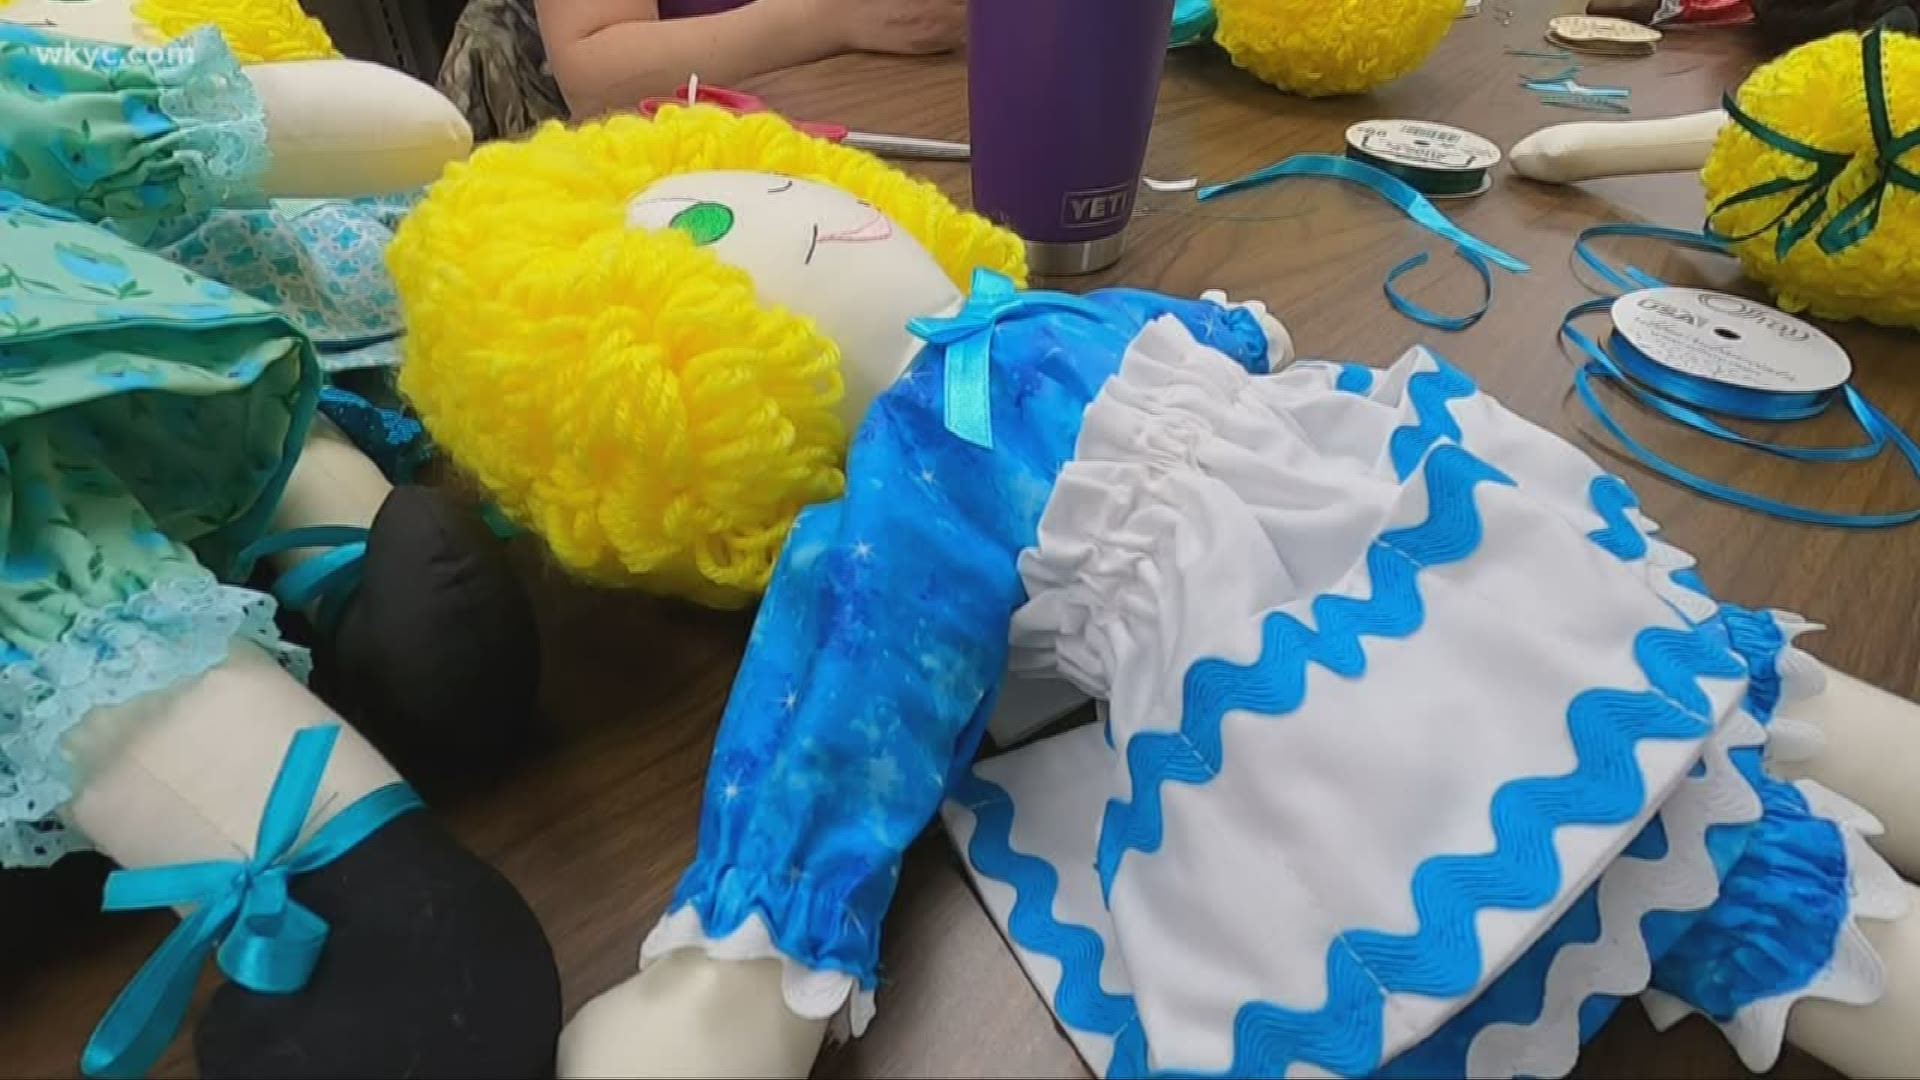 The community is making 'Emma dolls' in honor of Emma Pfouts. She is the Norton teen who is battling back from a brain injury following a severe asthma attack.